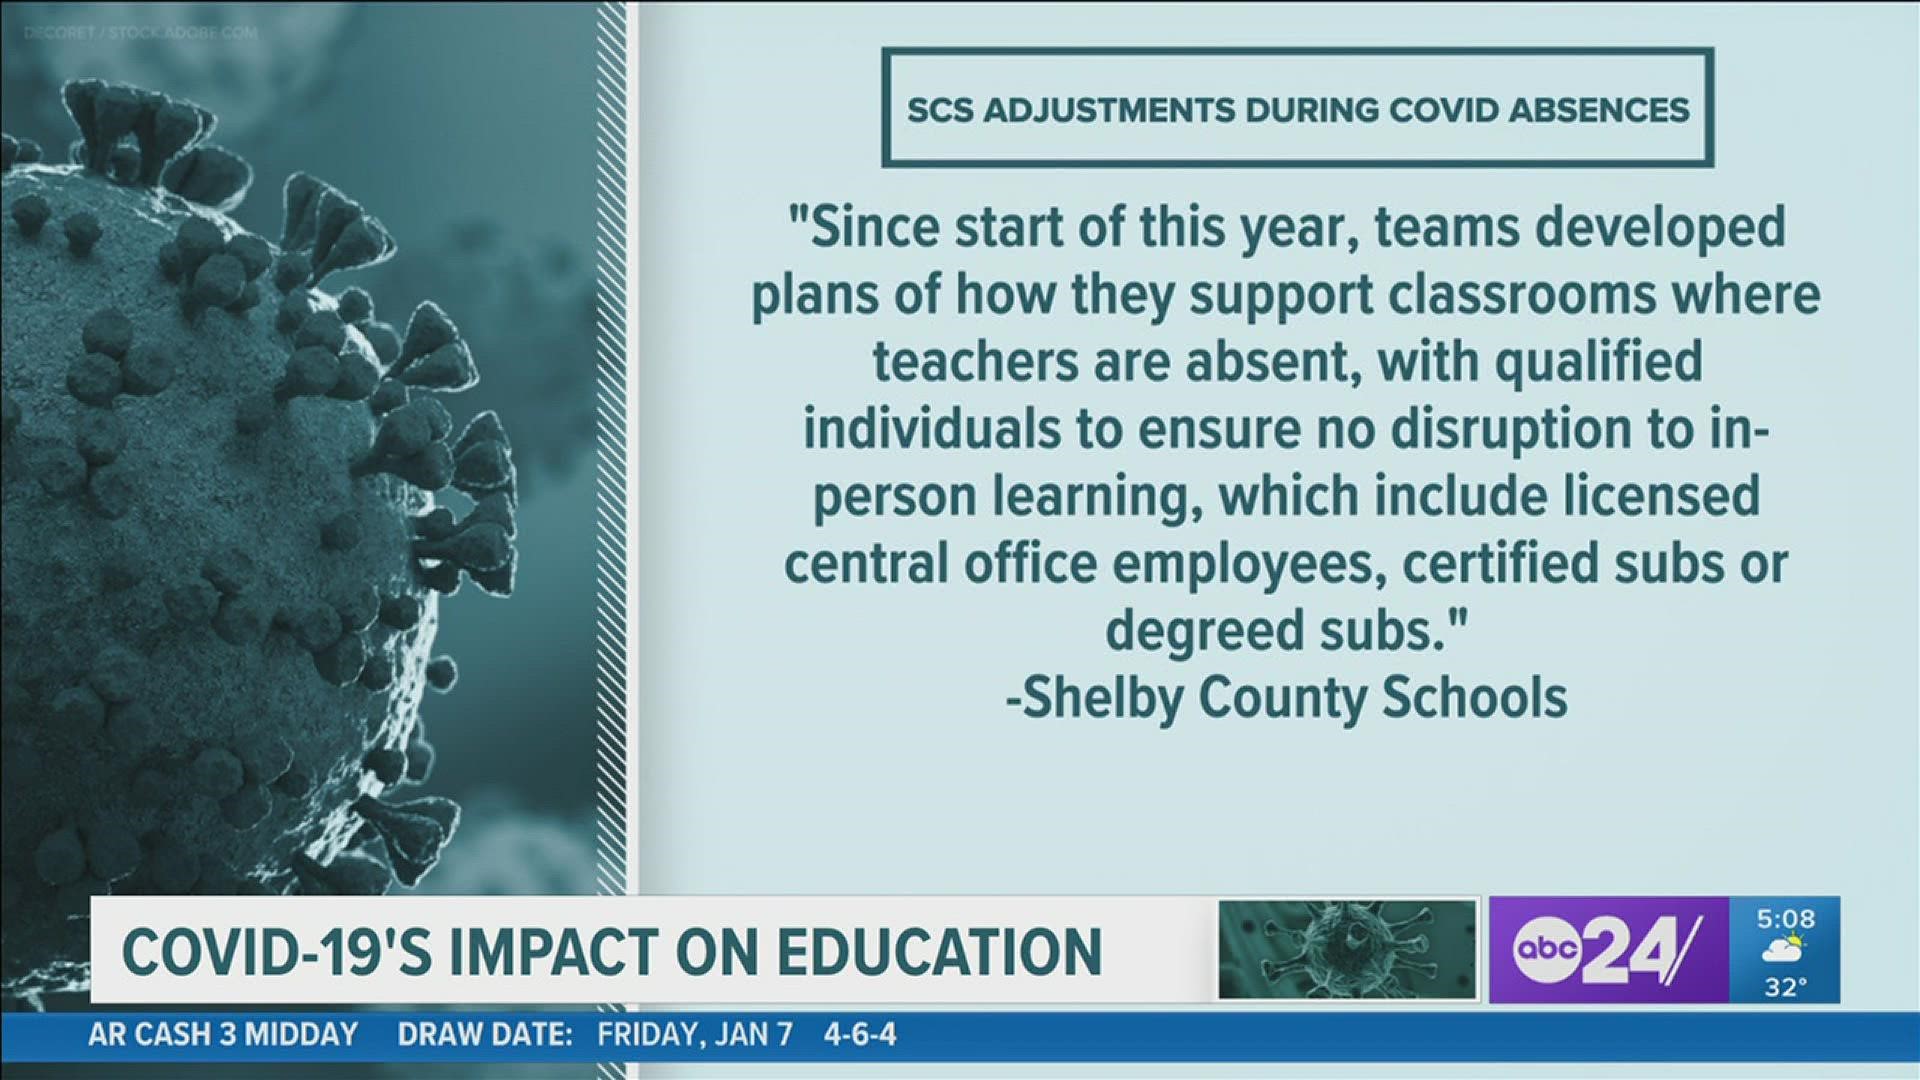 A record high number of active cases - including with children - in Shelby County is causing absences during the first week back after holiday break.